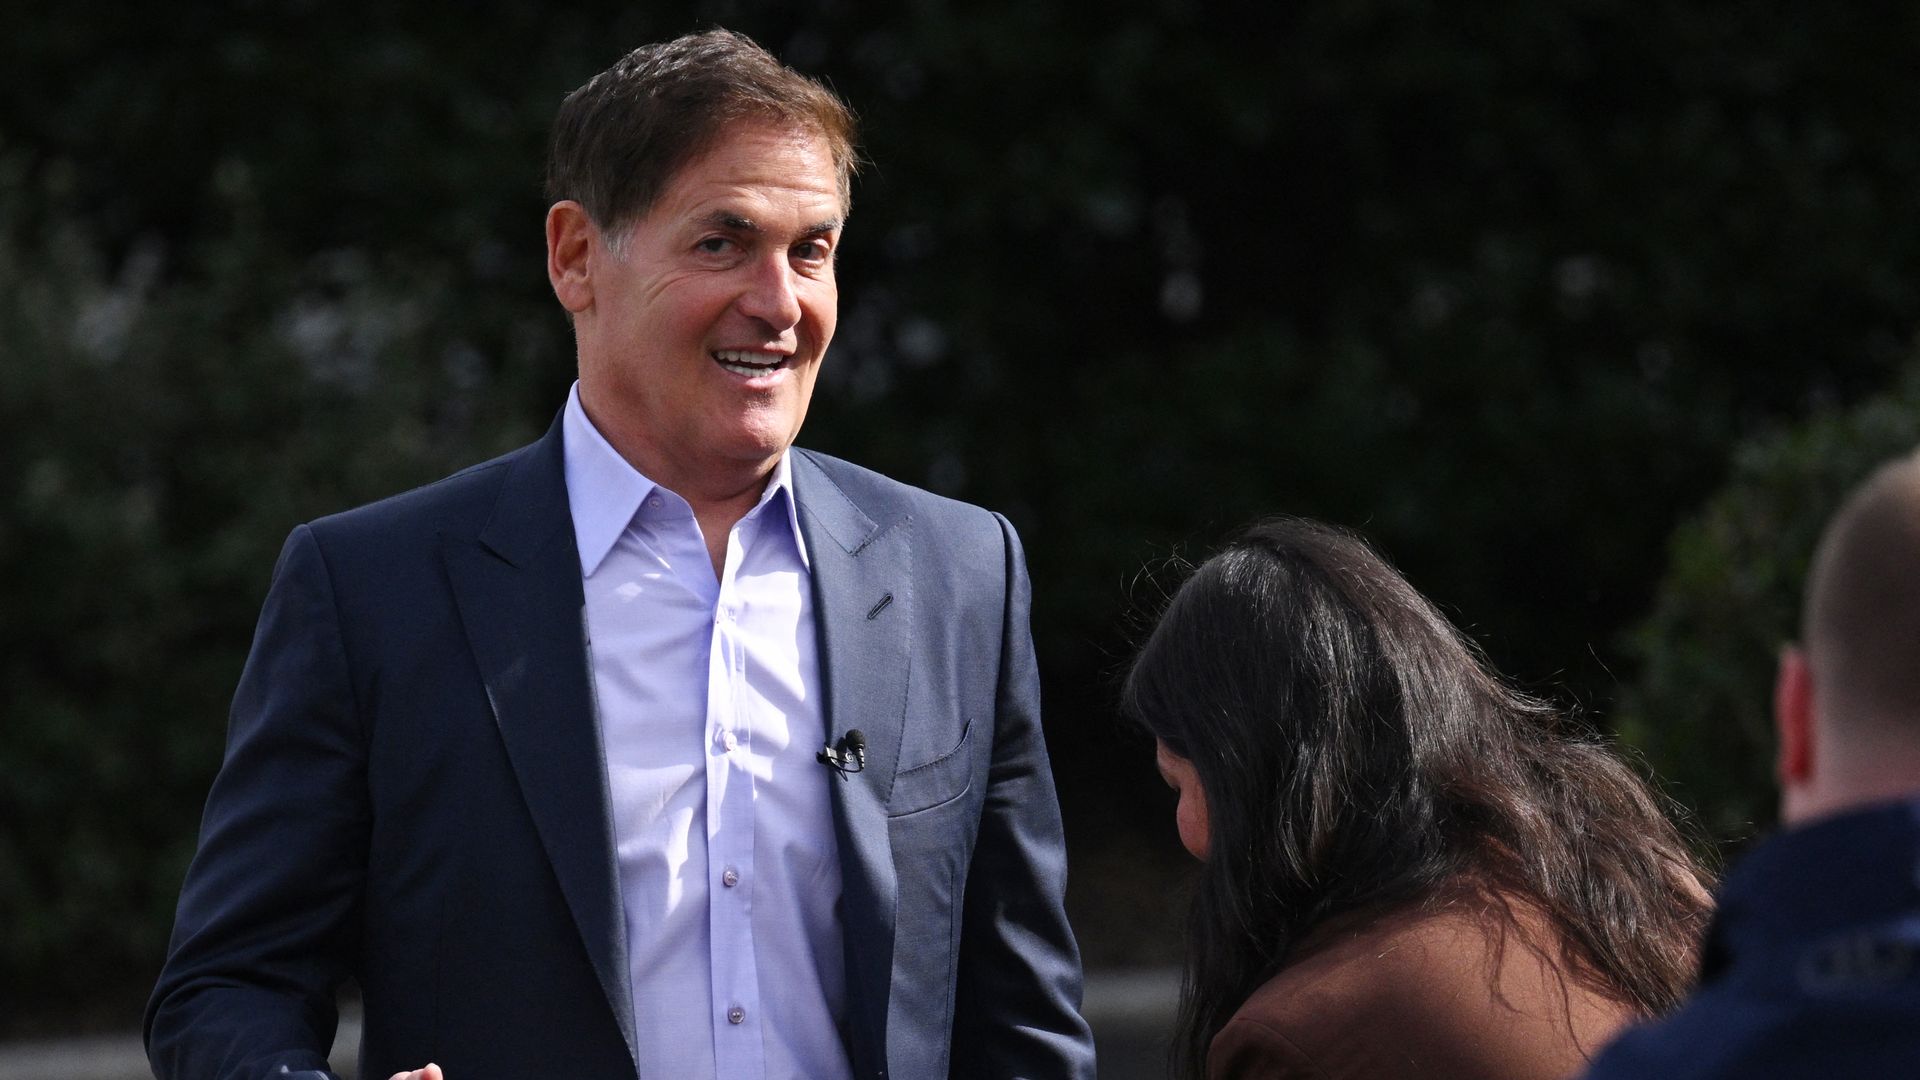 Mark Cuban addresses a group of people outside the White House.